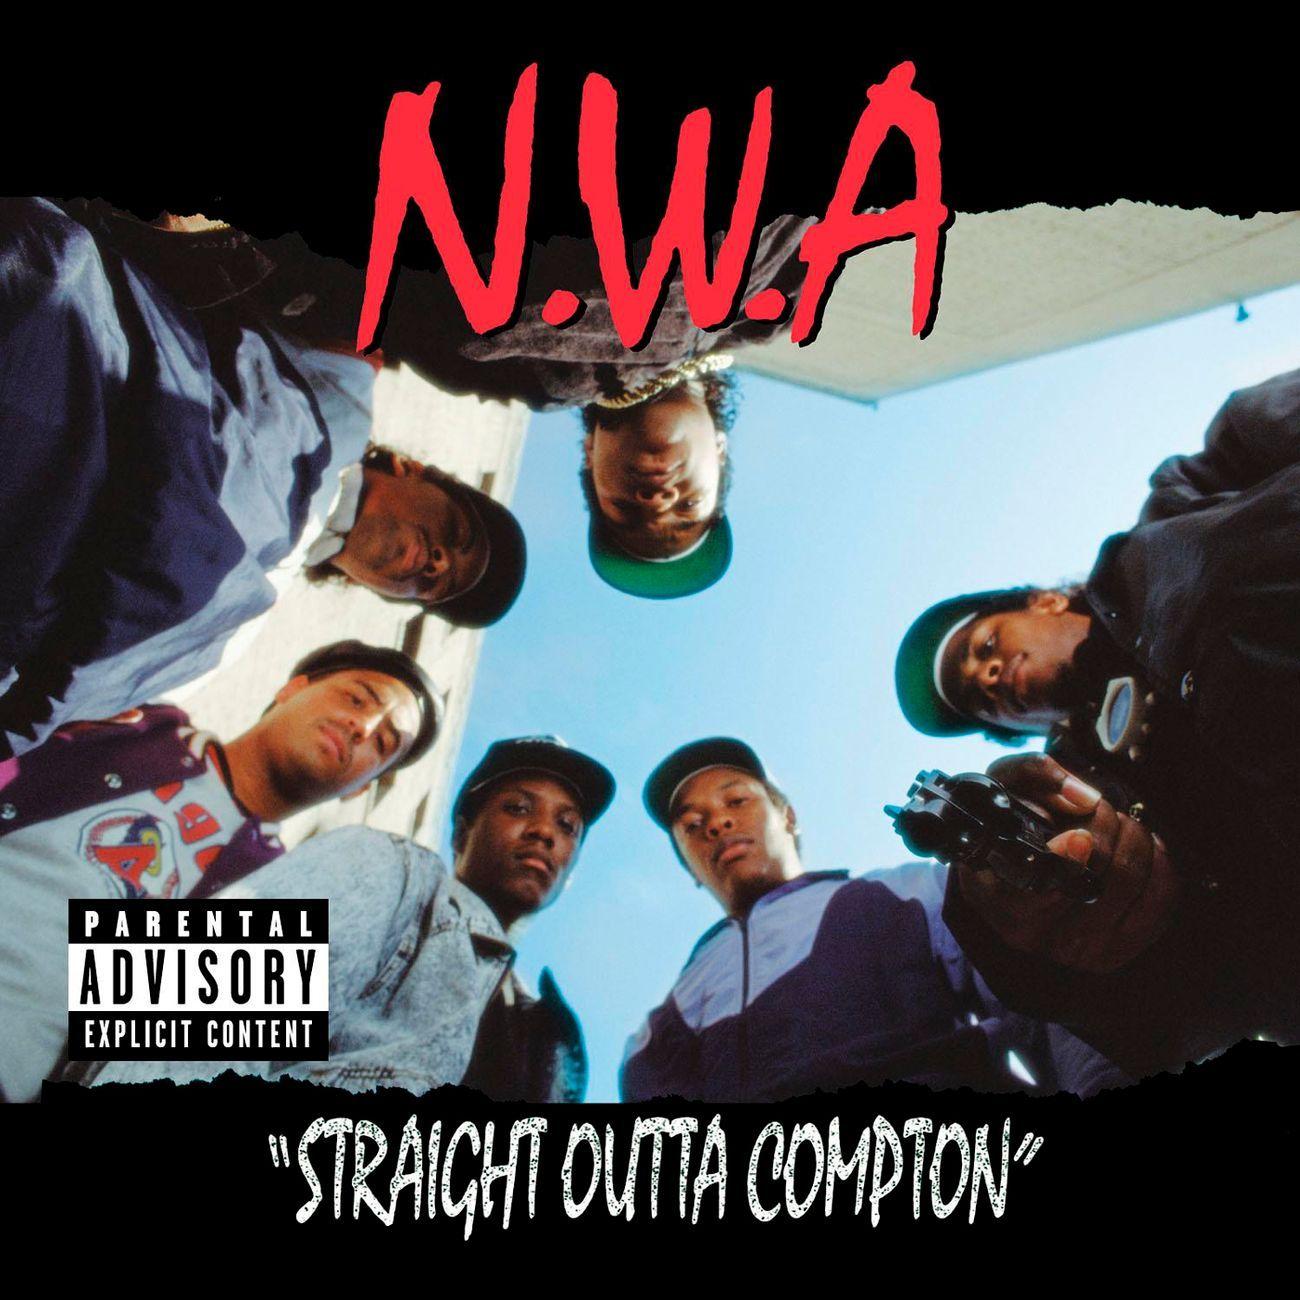 Image For > Nwa Wallpapers Iphone